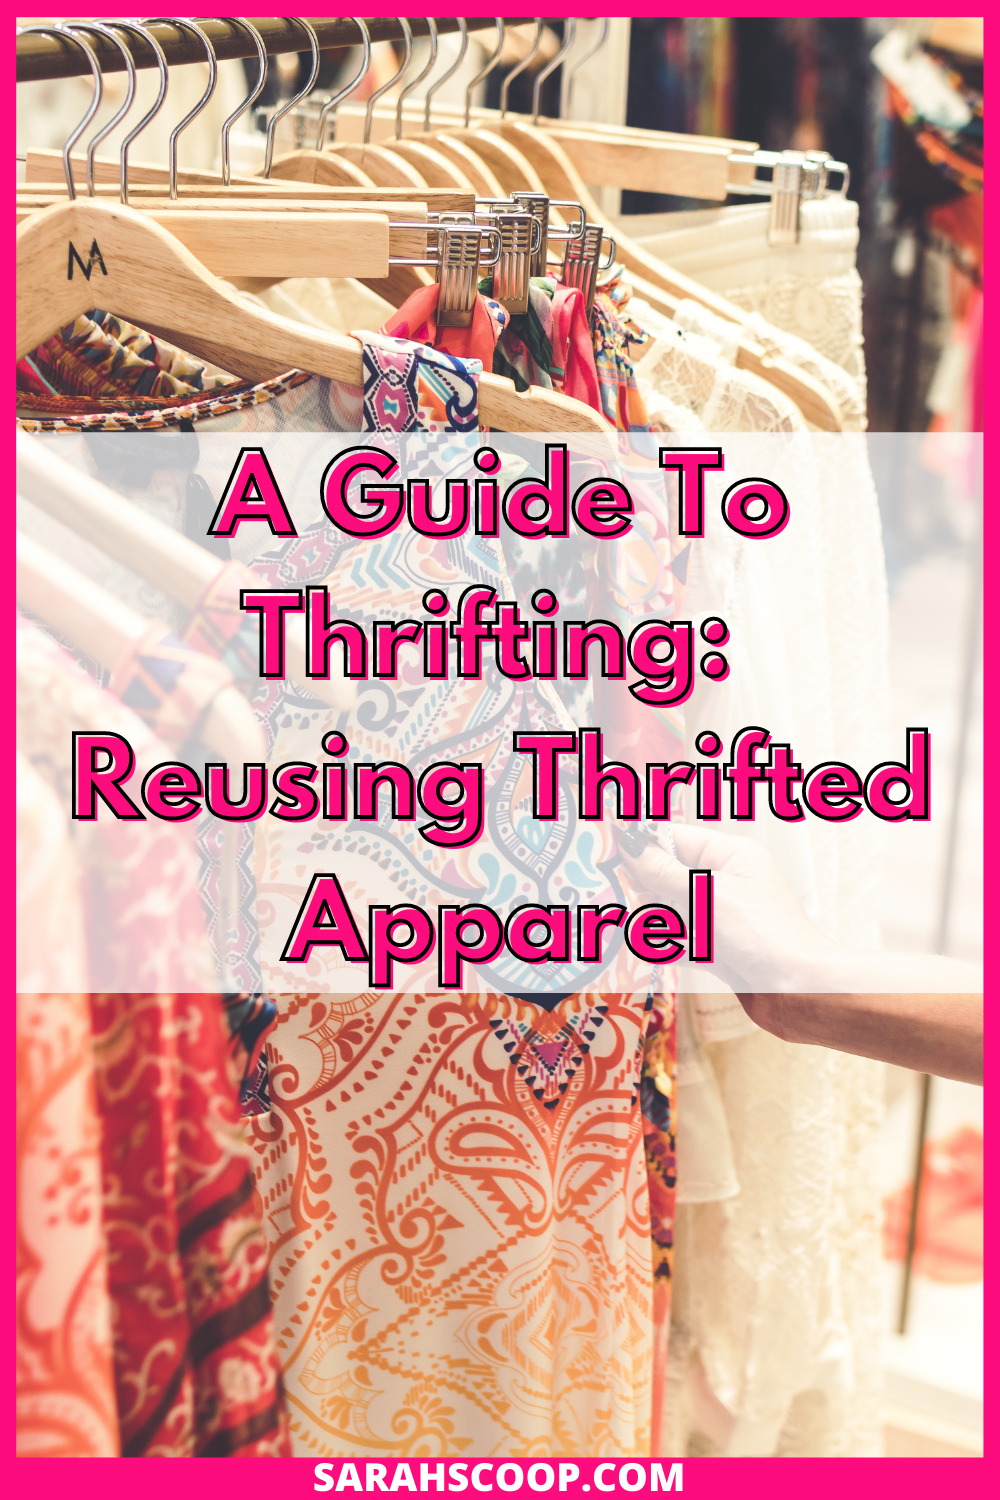 A guide to thrifting and reusing thrifted apparel.